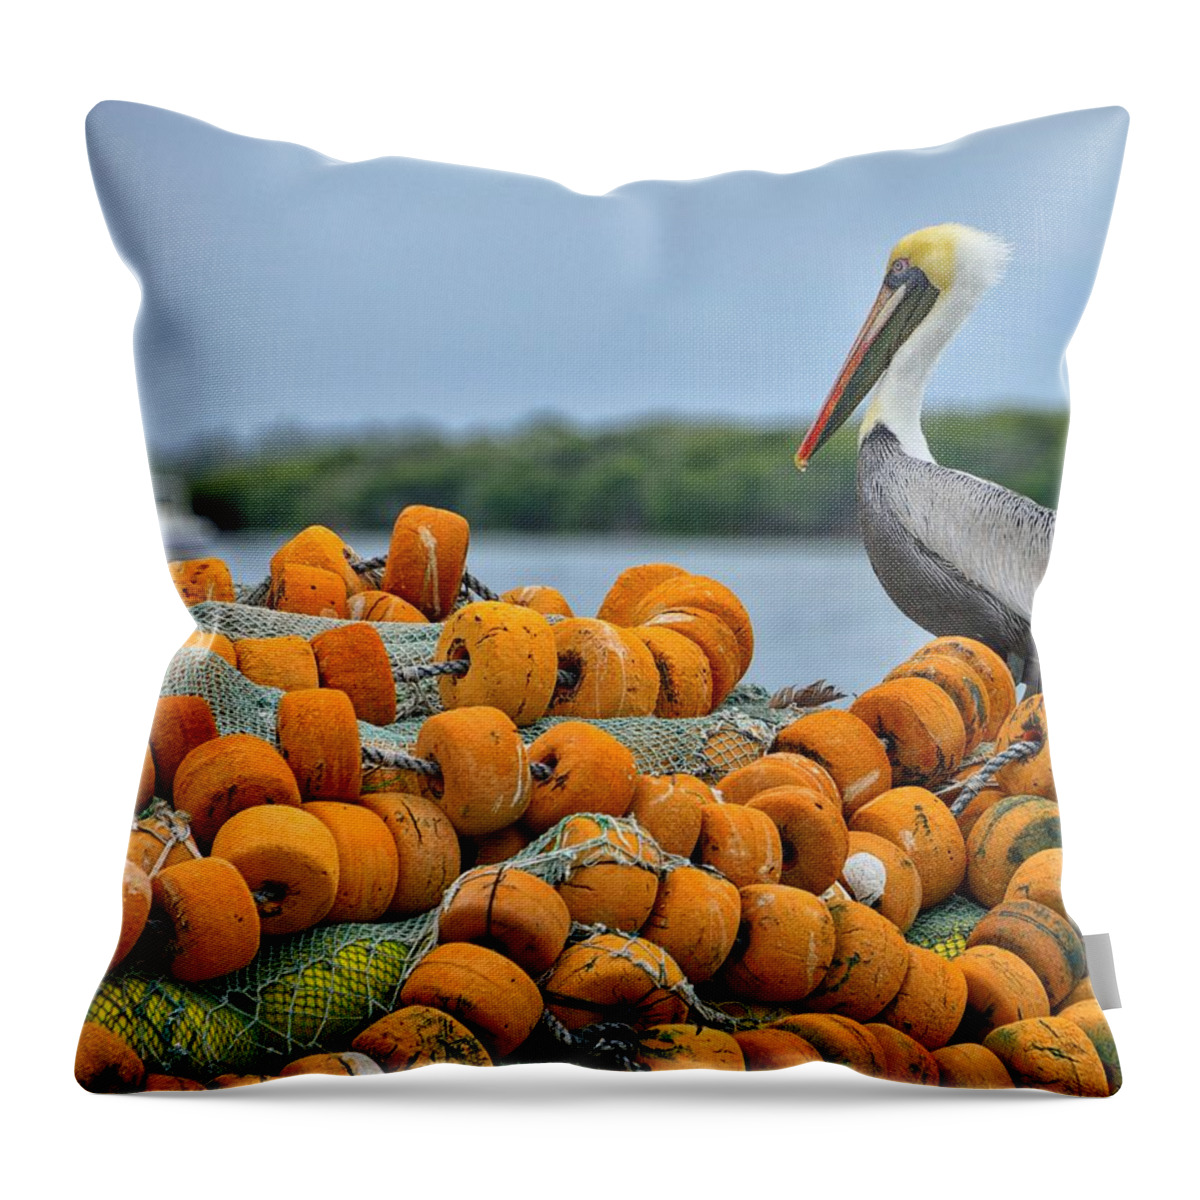 Landscape Throw Pillow featuring the photograph Choices by Alison Belsan Horton